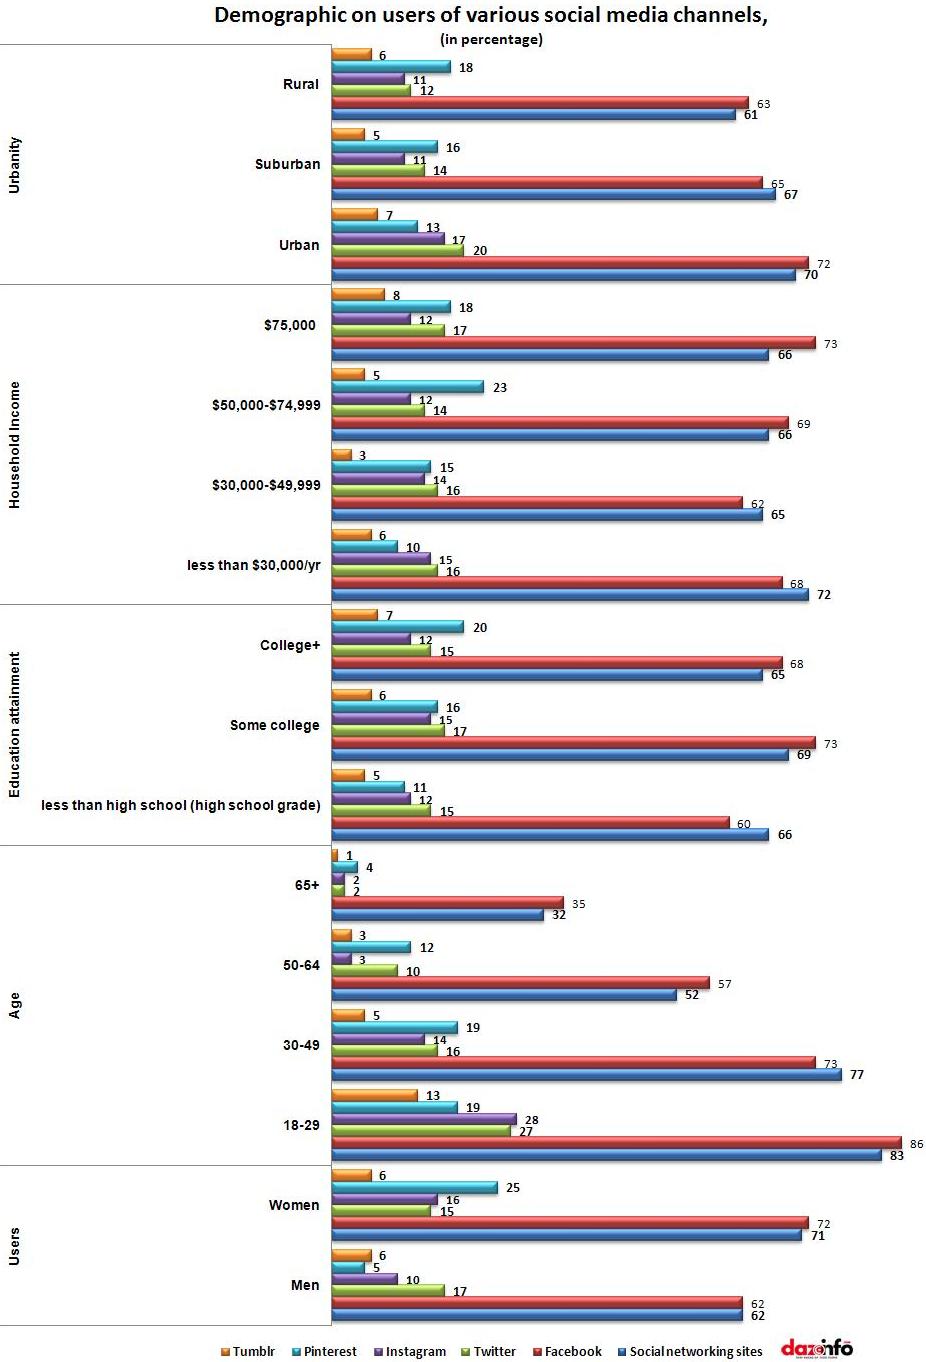 Demographic on users of various social media channels_2012